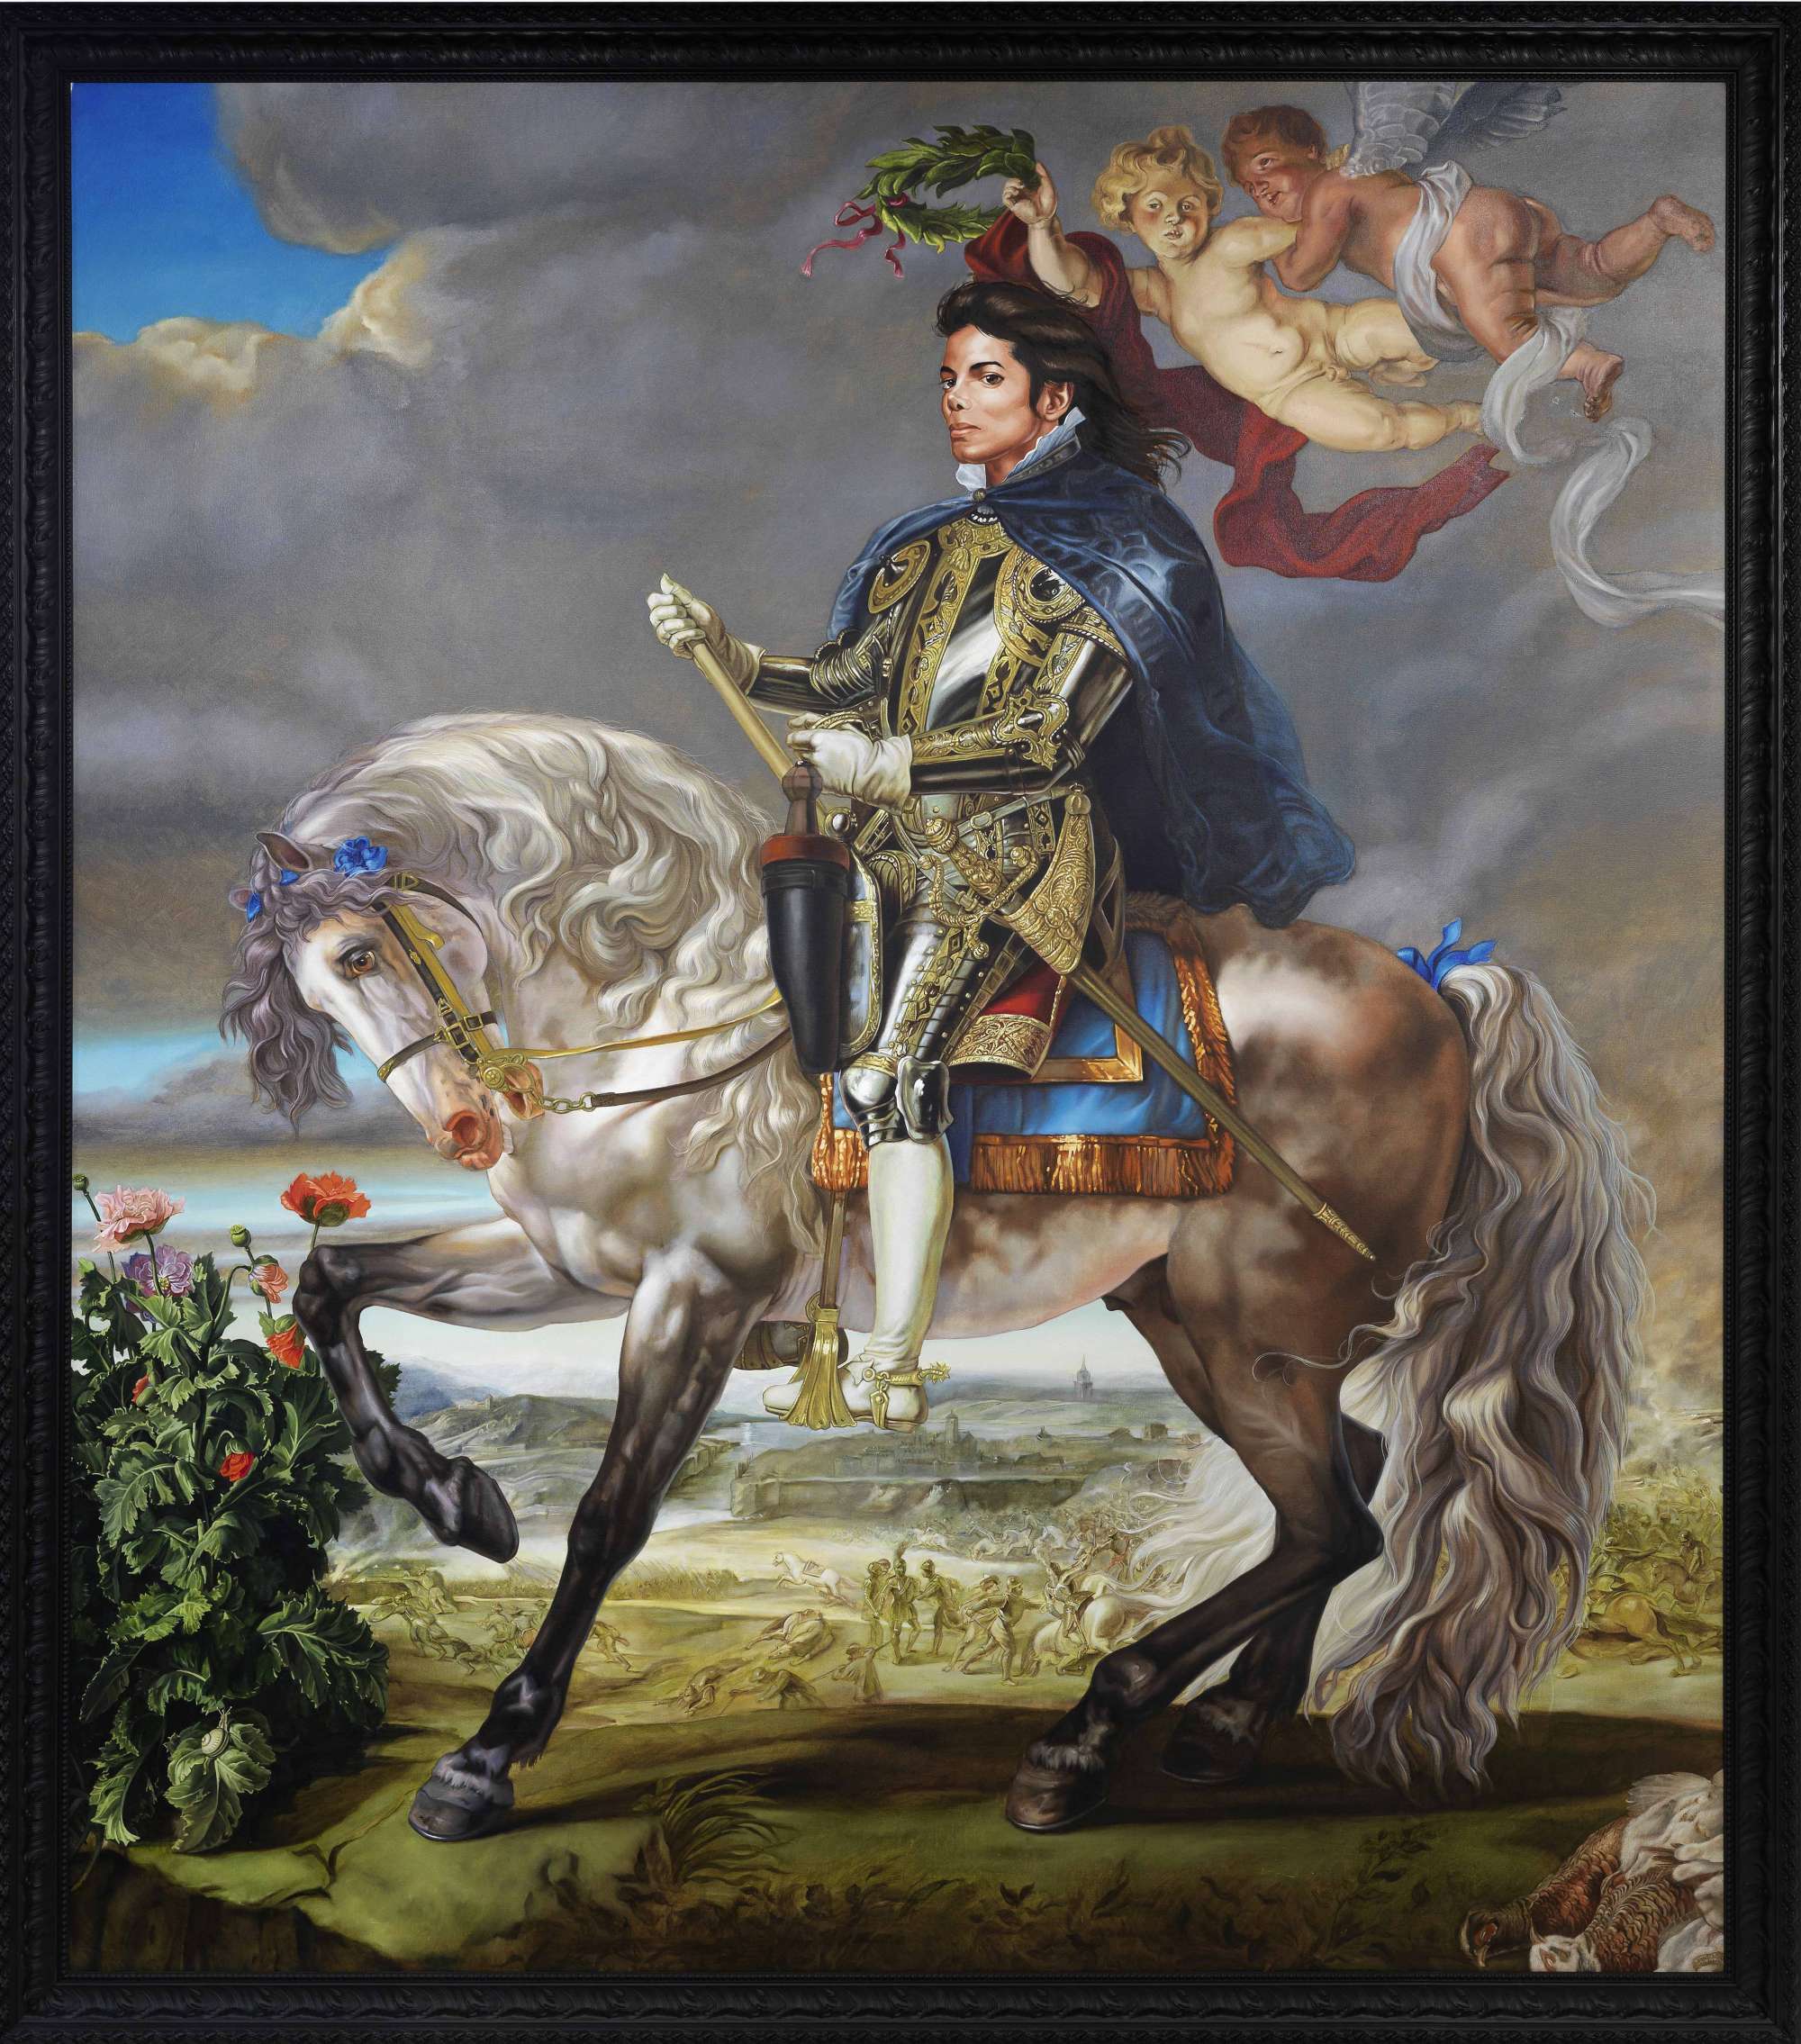 Equestrian Portrait of King Philip II (Michael Jackson), 2010 by Kehinde Wiley.